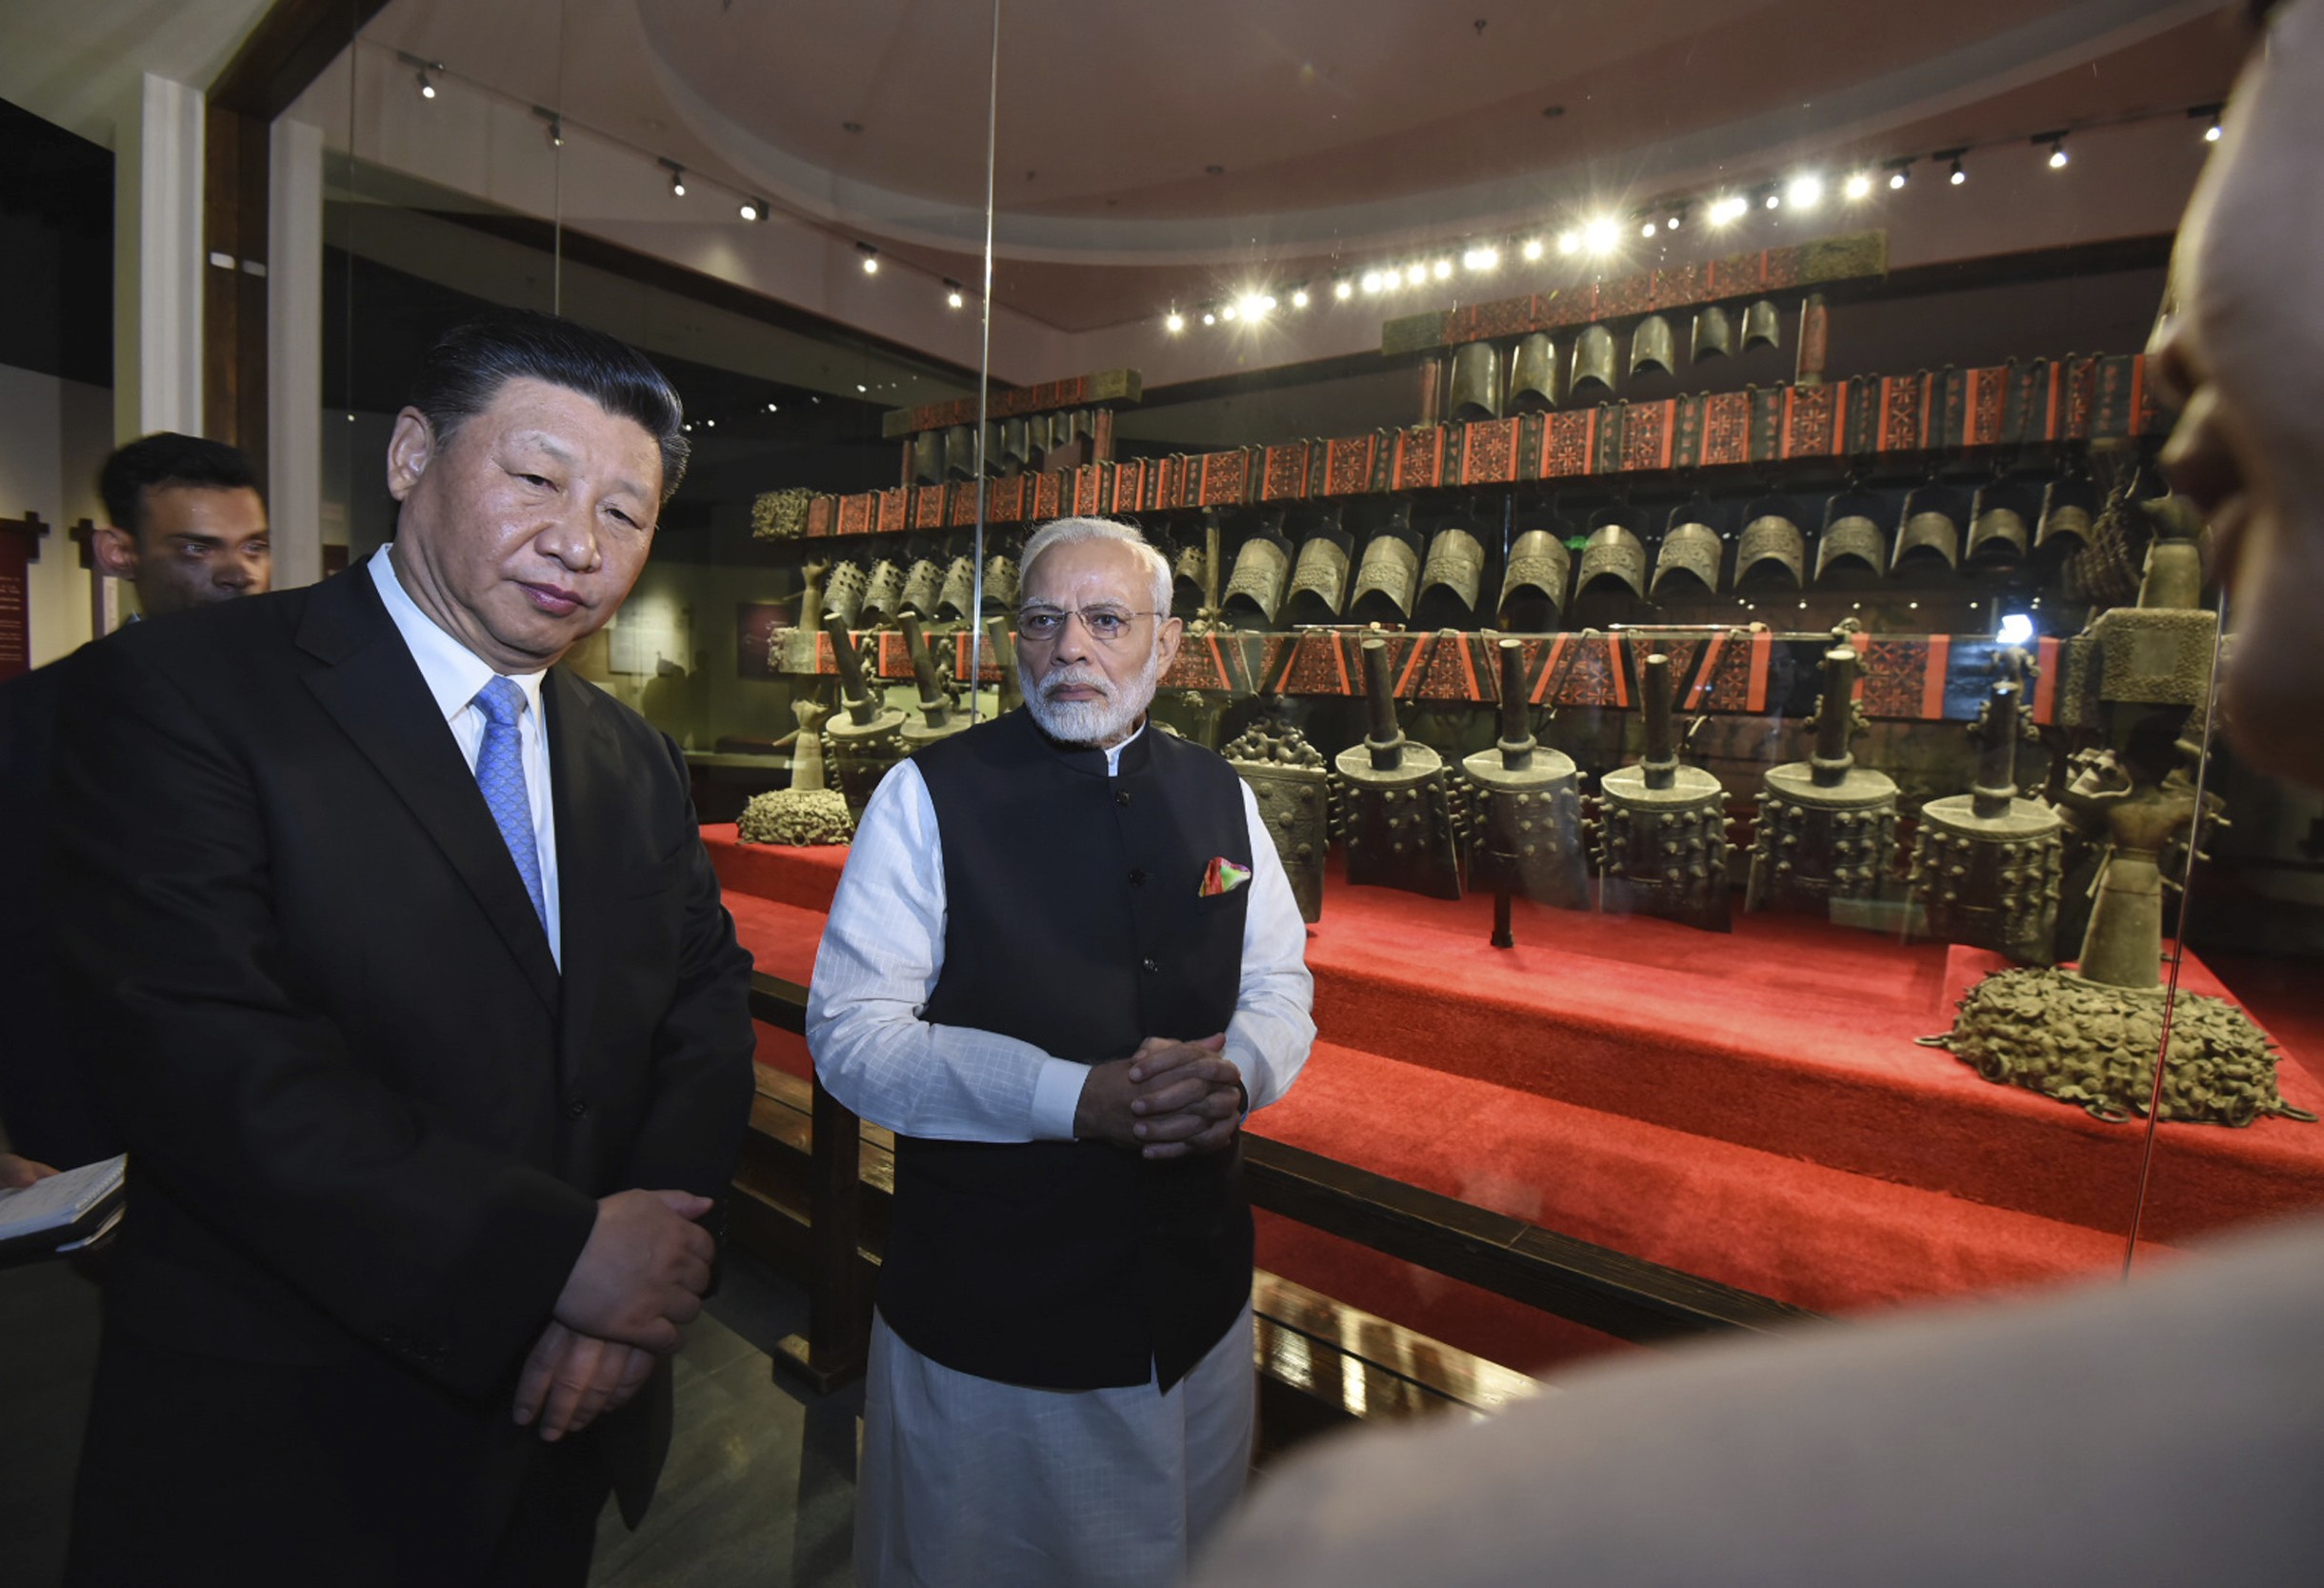 The US president’s trade tiff with Beijing could collapse the globalisation trend, threatening China’s and India’s economic well-being, Mohan Guruswamy writes